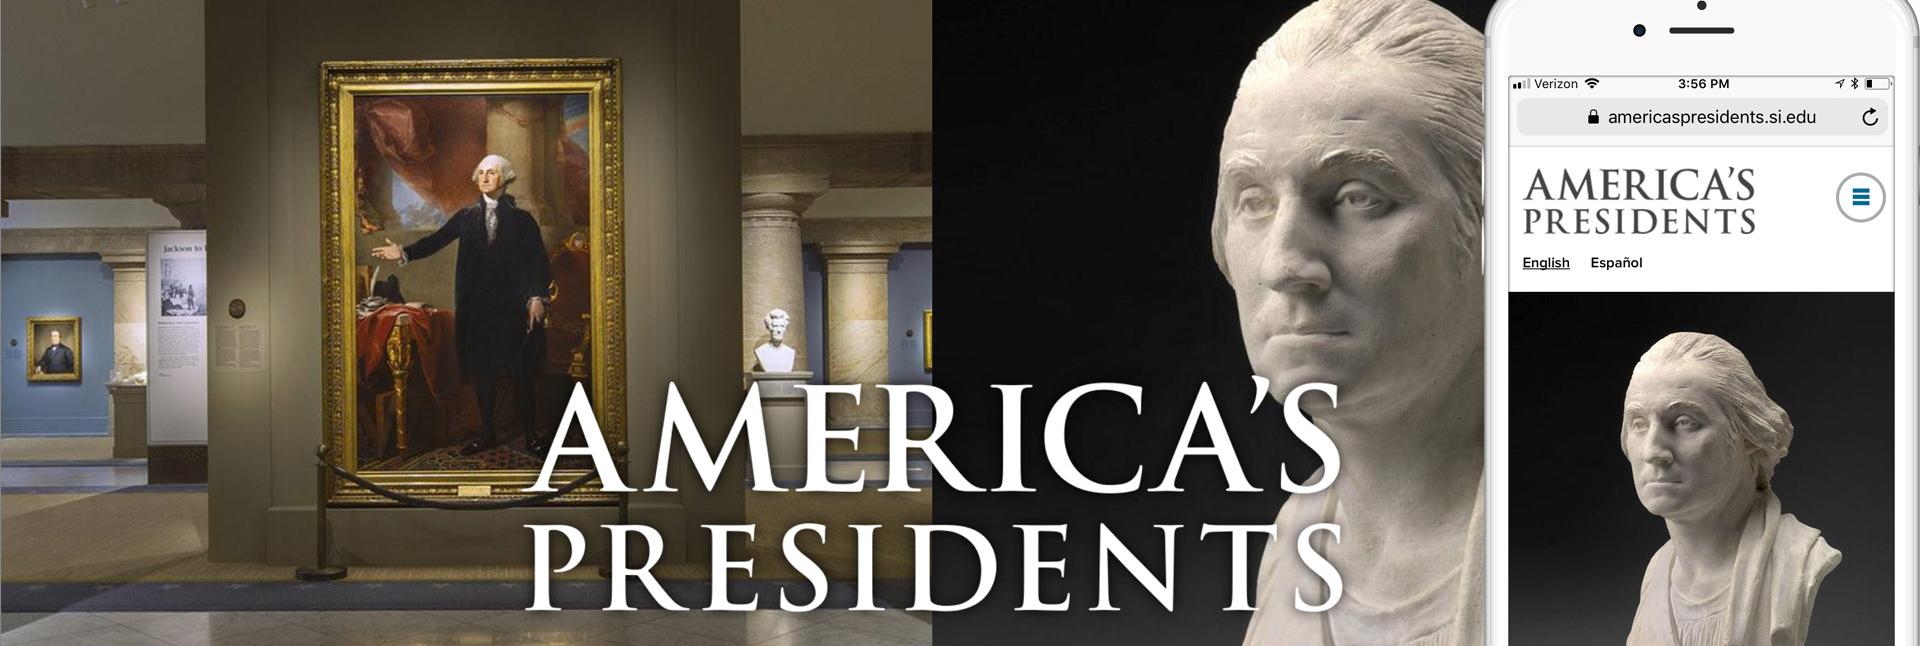 Desktop and mobile versions of the America's Presidents site